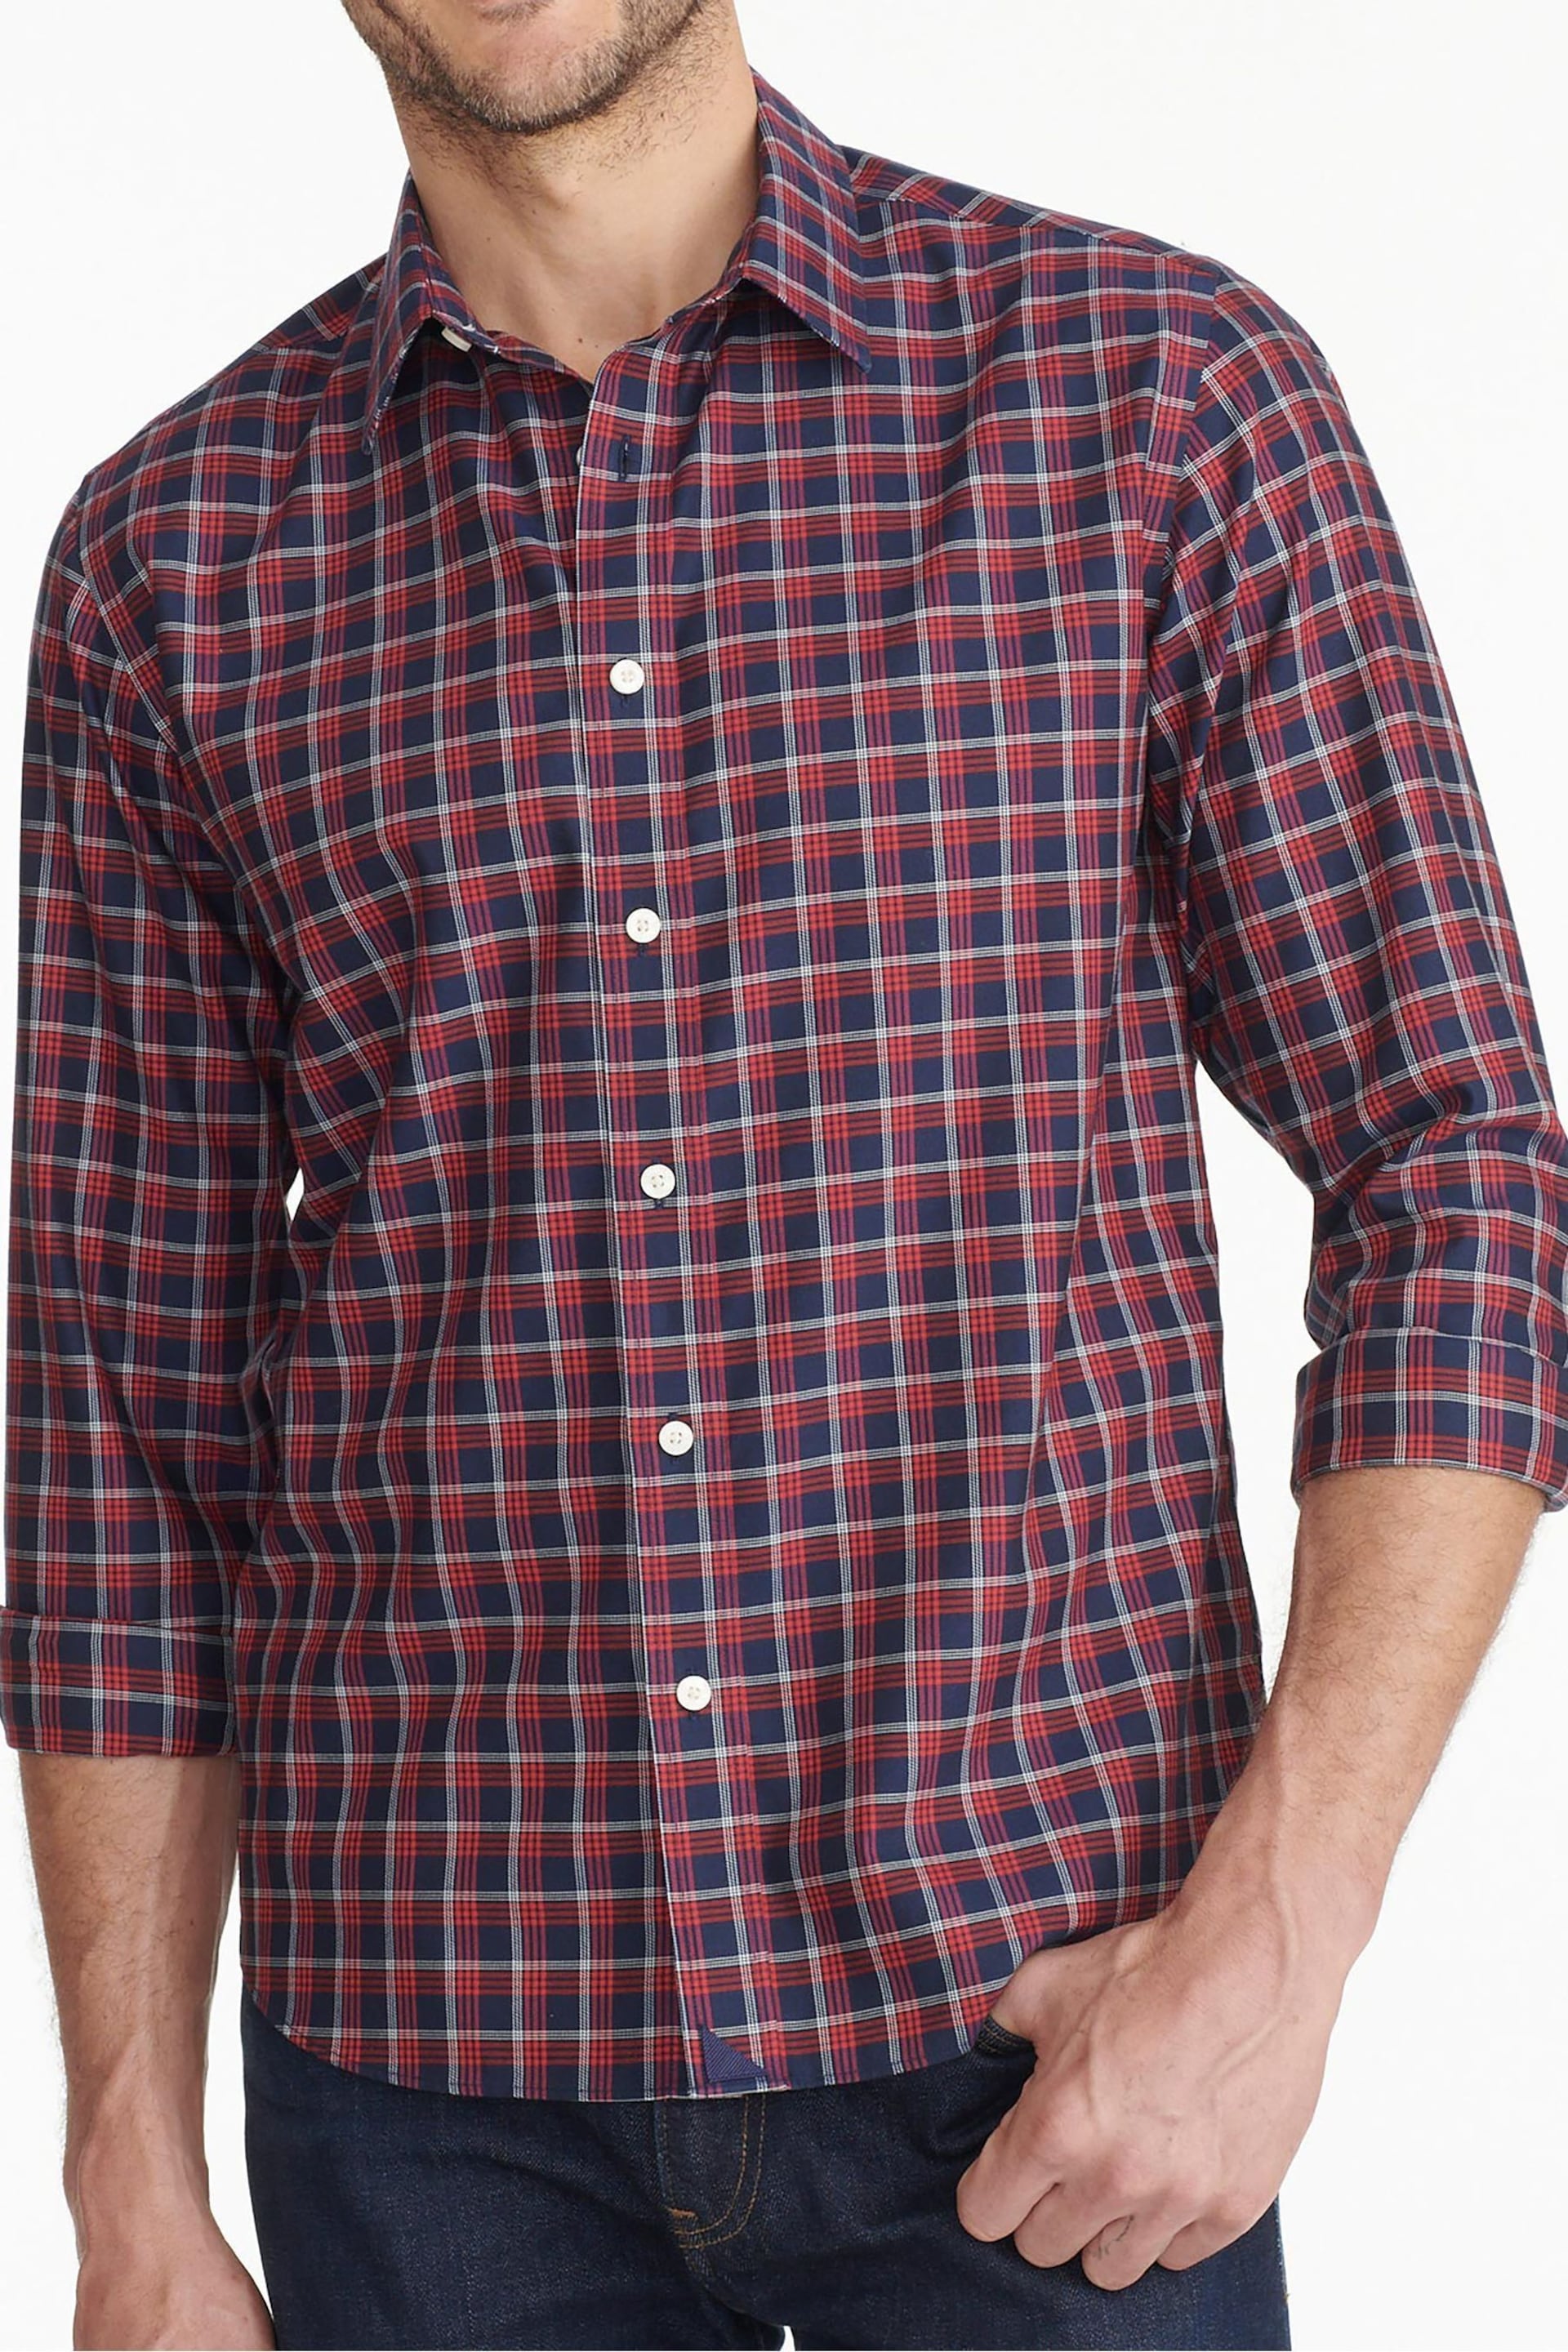 UNTUCKit Blue/Red Wrinkle-Free Slim Fit Cheny Shirt - Image 4 of 6